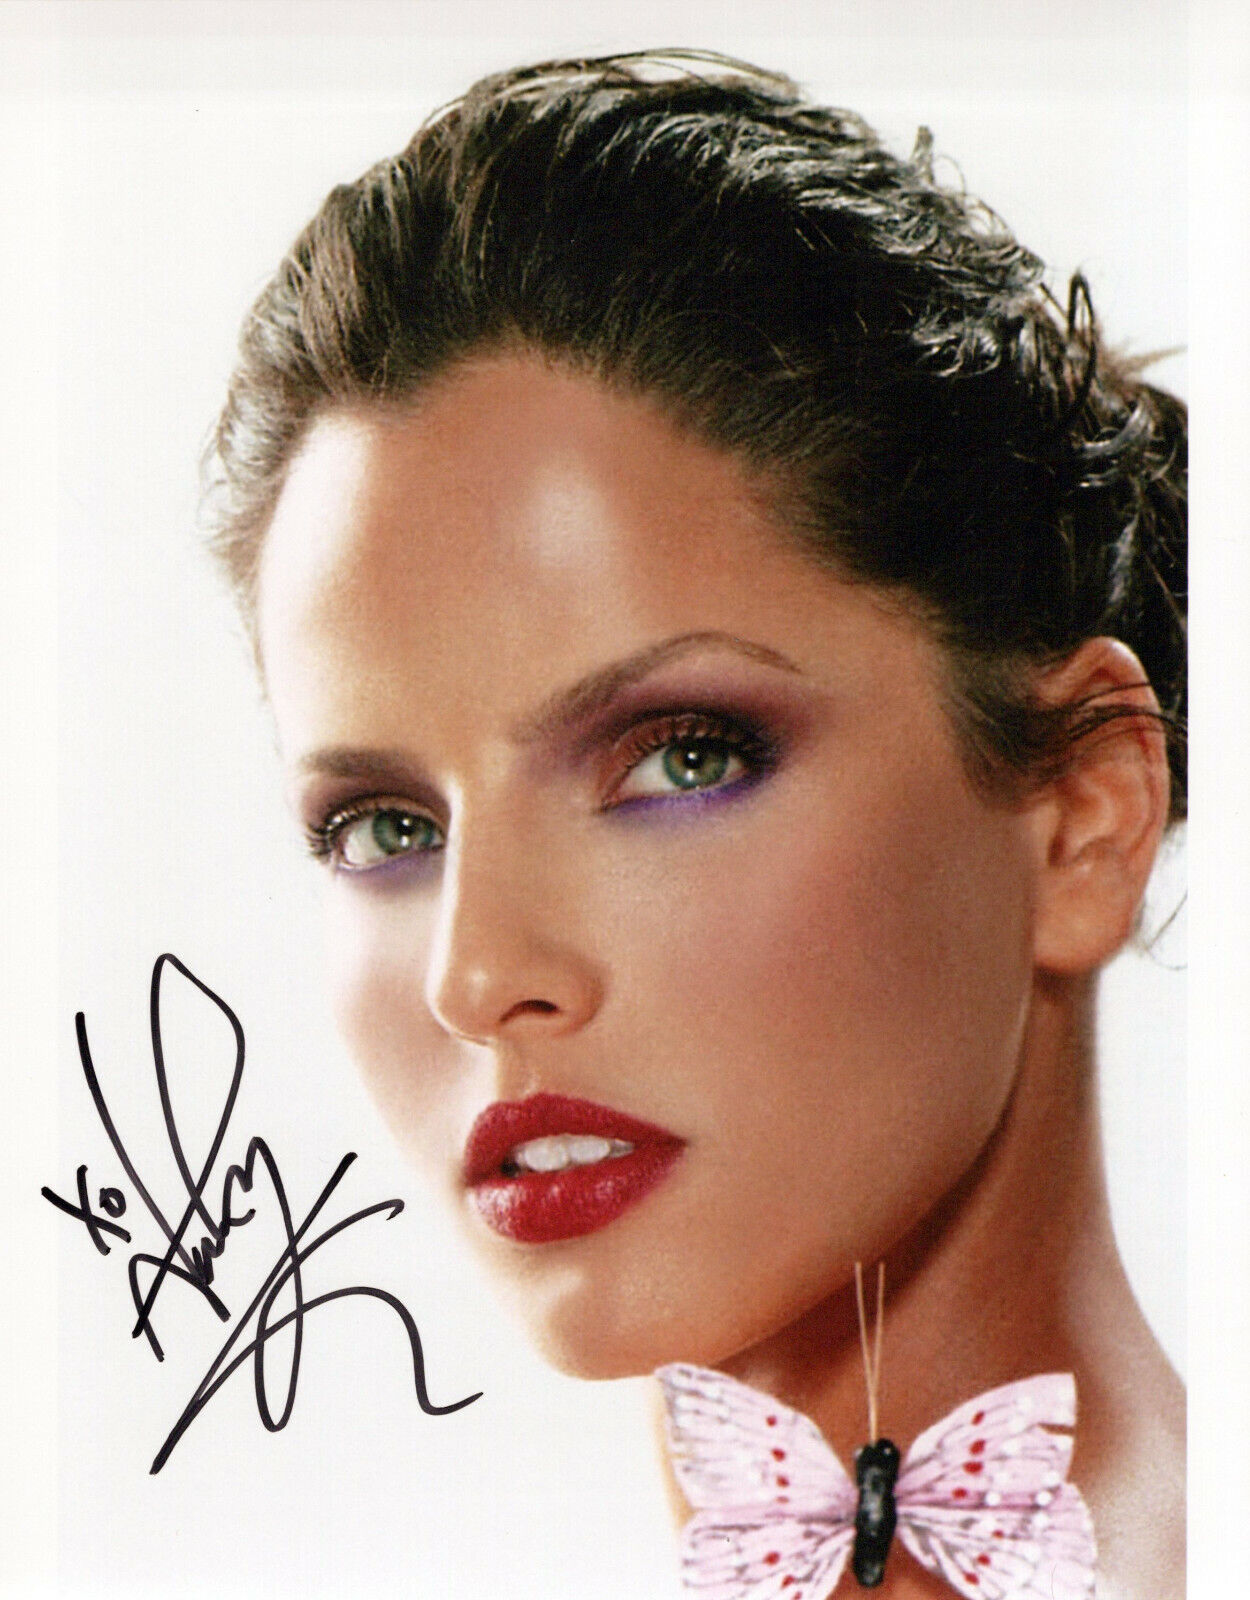 Noa Tishby glamour shot autographed Photo Poster painting signed 8x10 #8